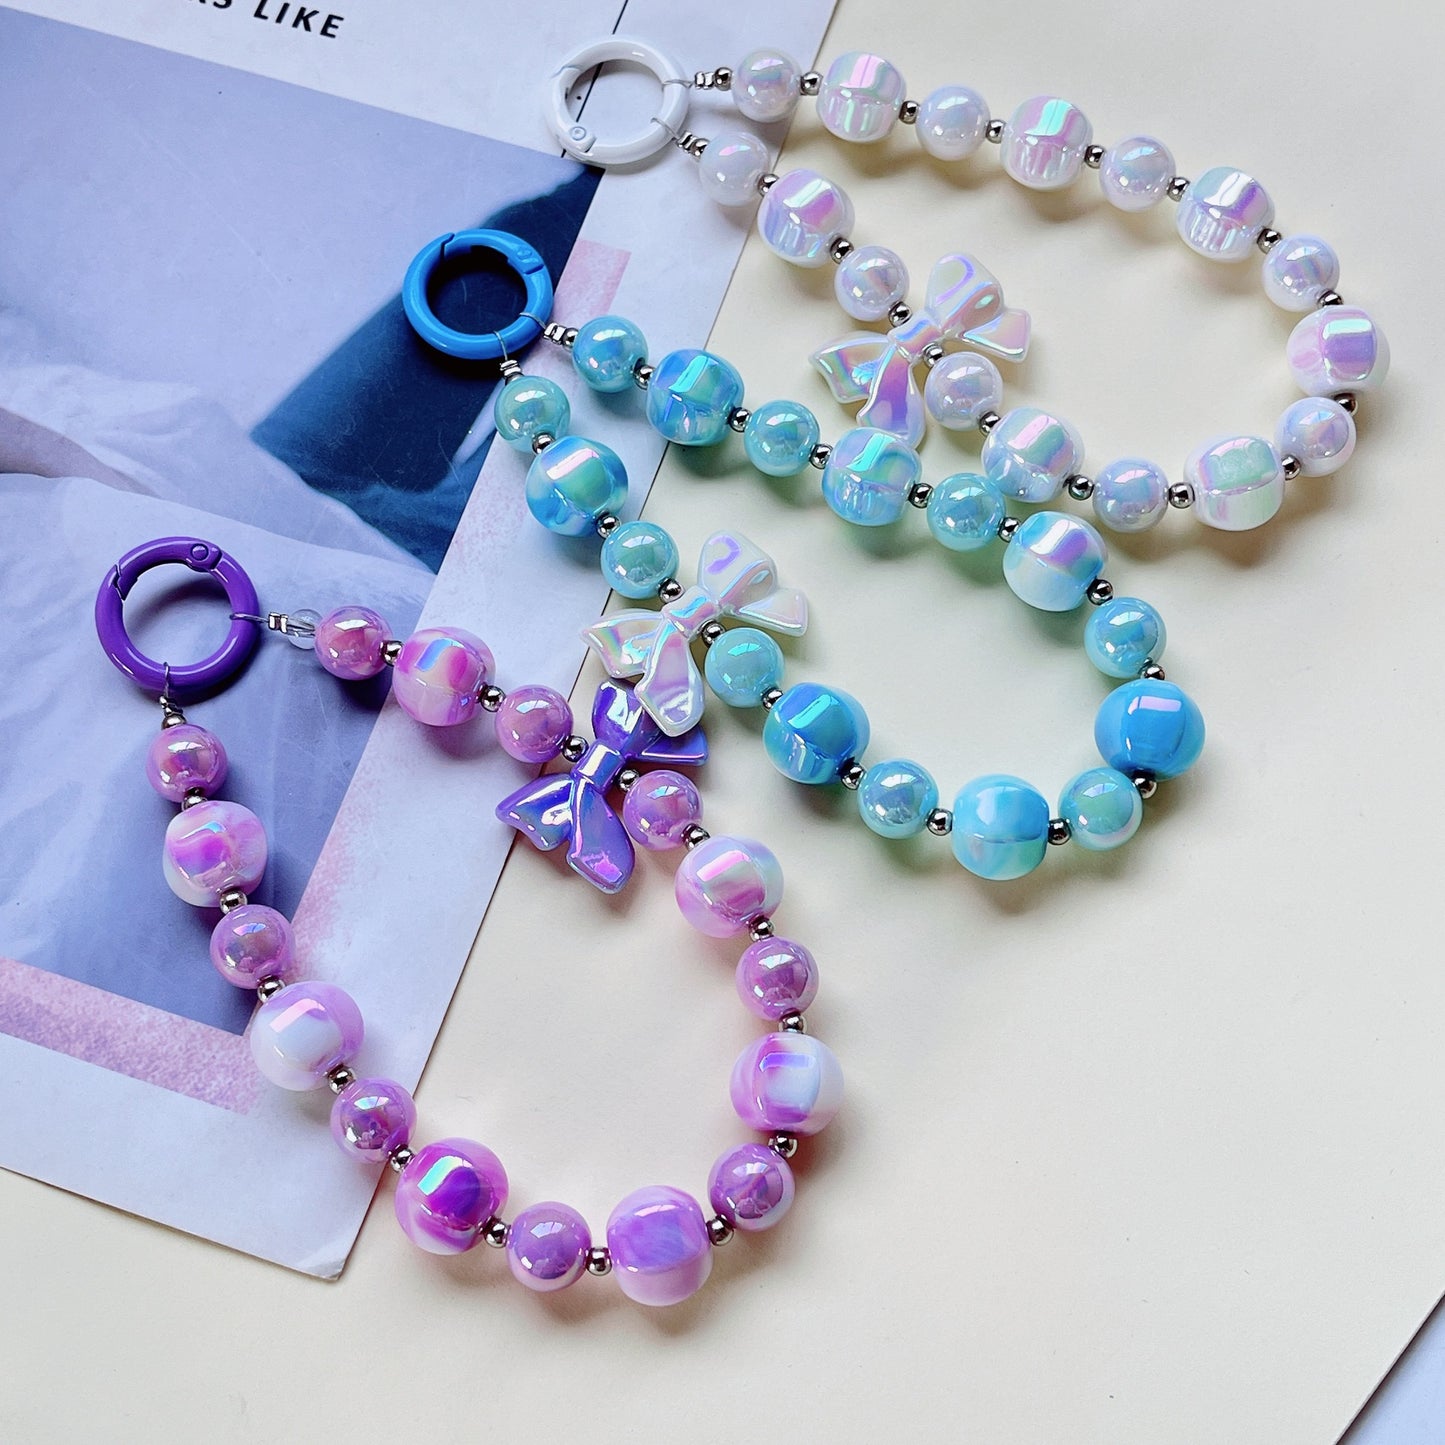 Special-shaped Double-color Beads Mobile Phone Charm Diy Handmade